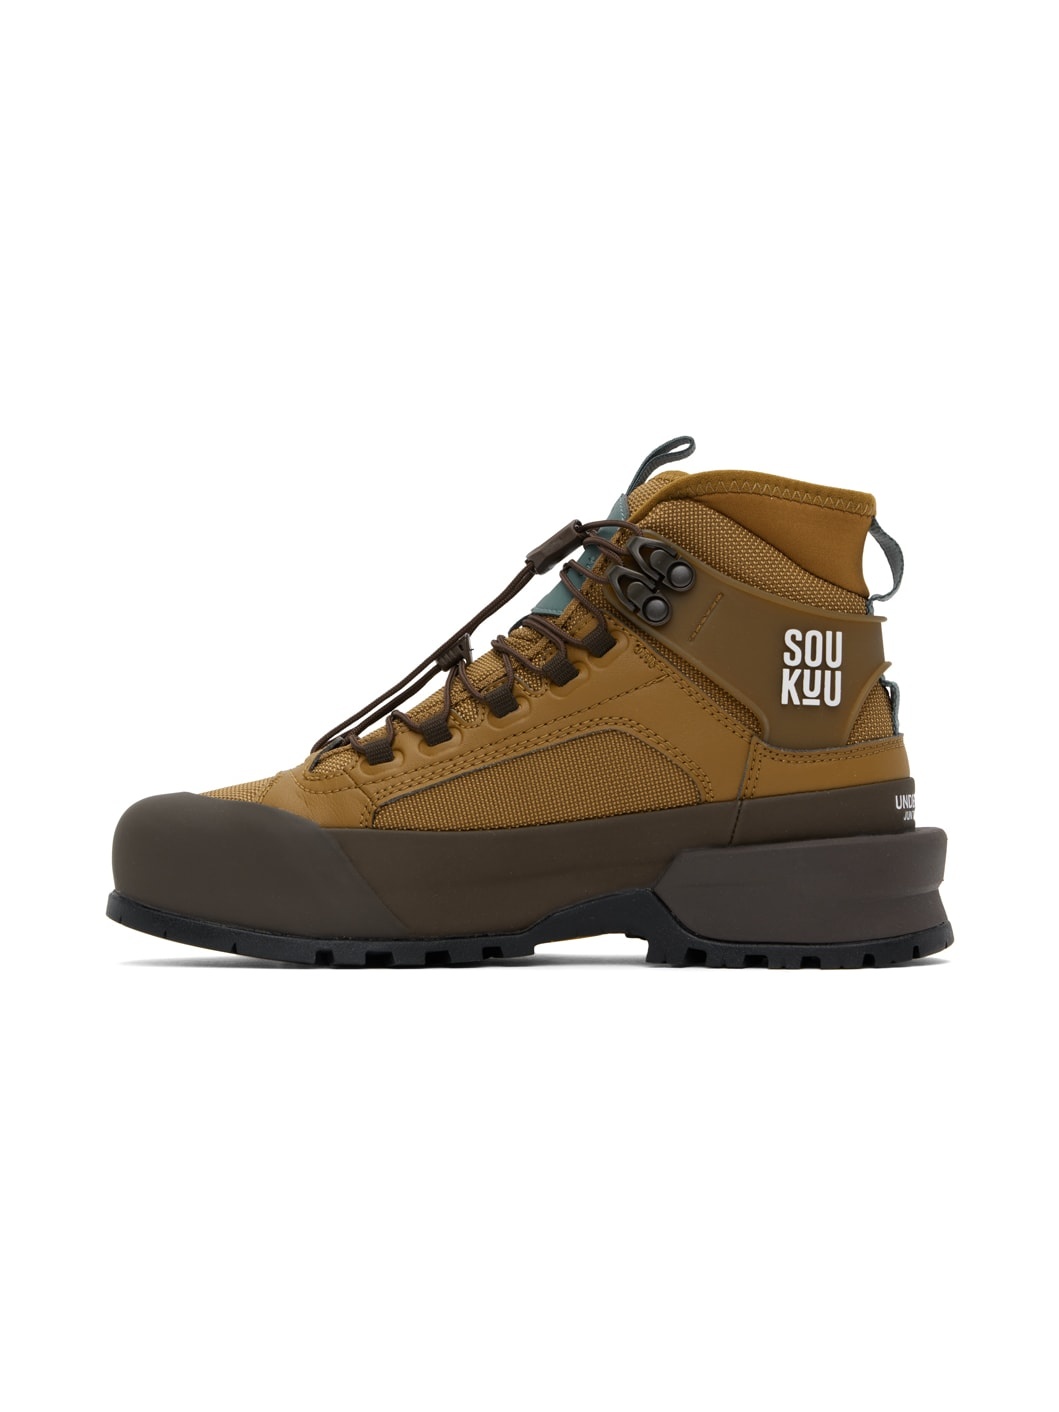 Brown The North Face Edition Soukuu Glenclyffe Boots - 3